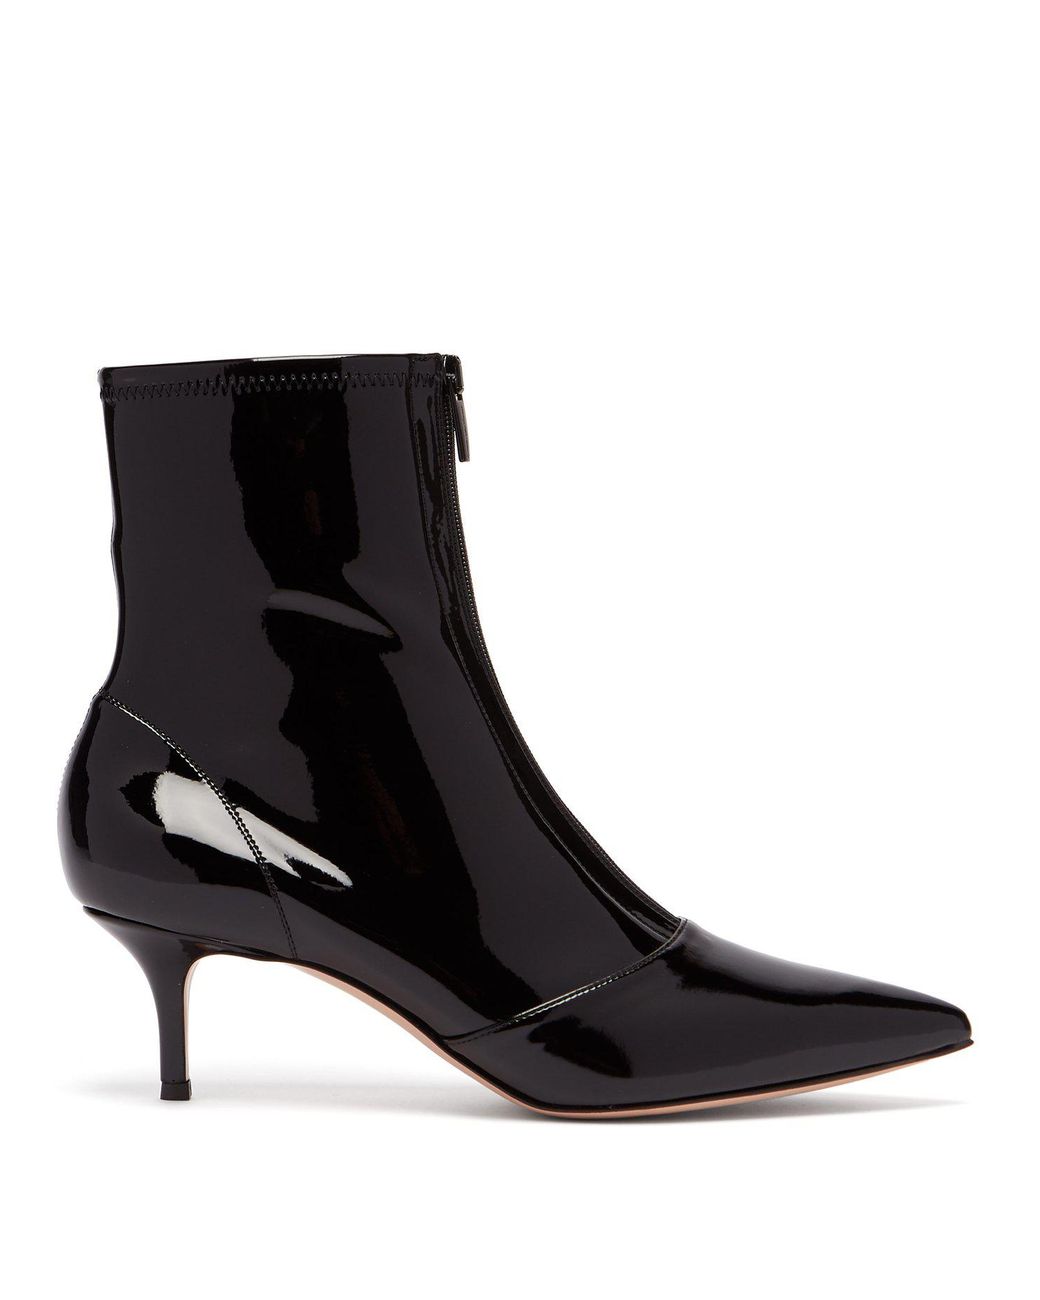 Gianvito Rossi Zip Front 55 Vinyl Ankle Boots in Black - Lyst